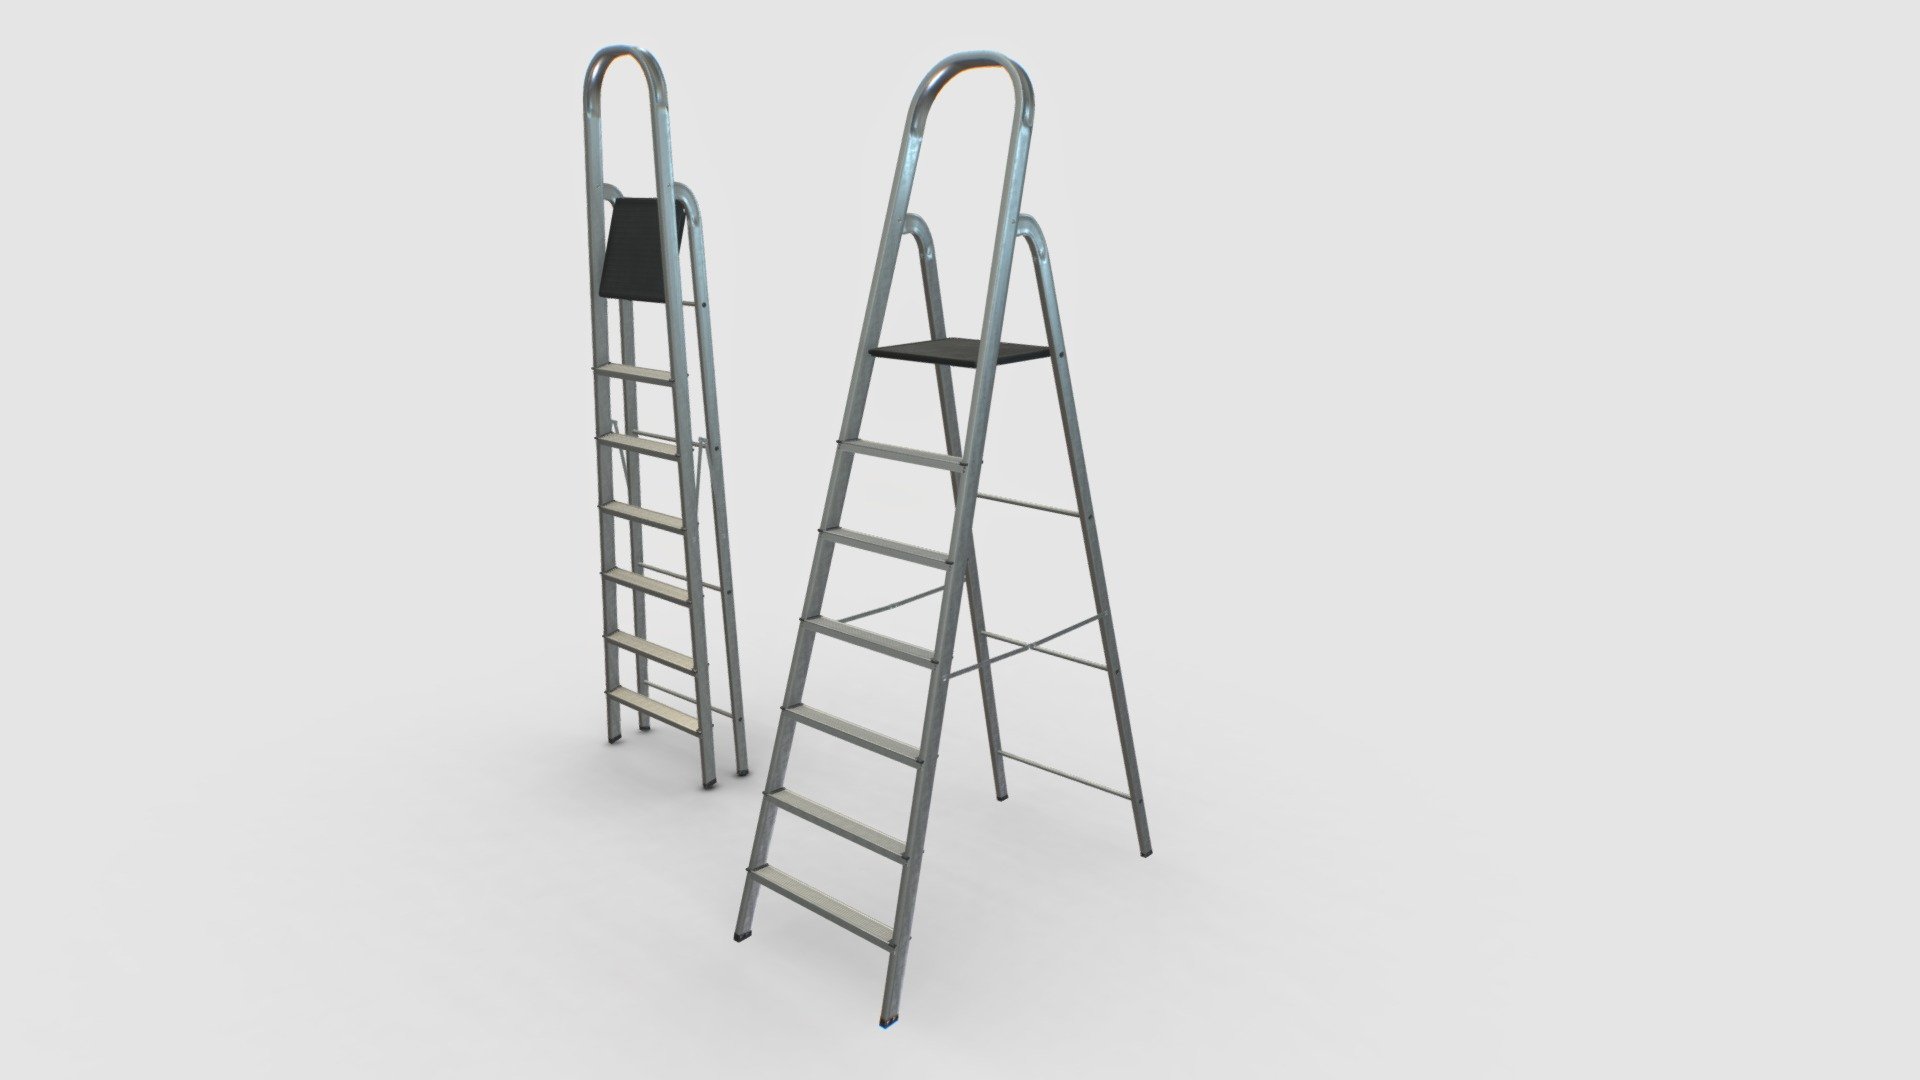 Industrial ladder based in real one. Real scale. Comes with 4096x PBR textures including Albedo, Normal, Metalness, Smoothness, Roughness and AO.

Model comes as a full object (open and closed) and in parts so you can animate it. Also comes with 2 sets of textures, normal and another looking more used.

Total polys 16000. 9000 verts - Step Ladder - Buy Royalty Free 3D model by 32cm 3d model